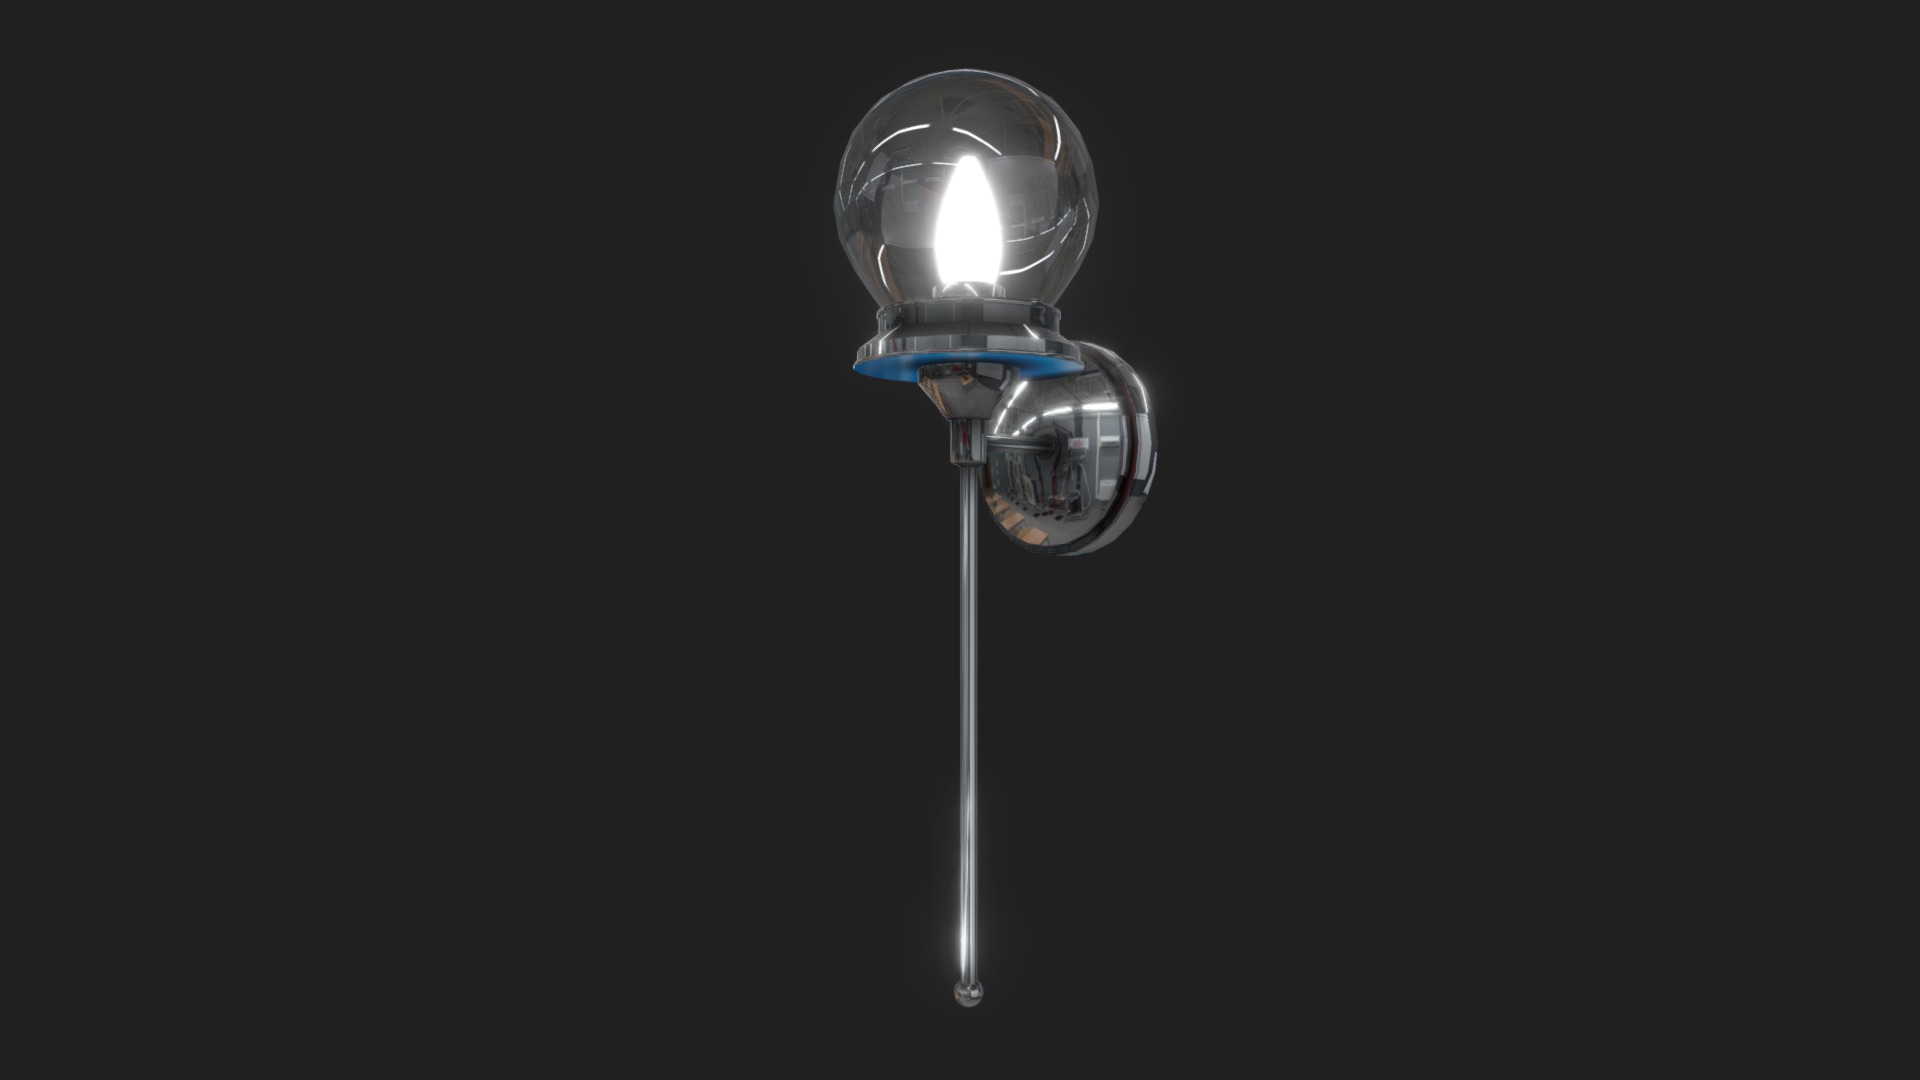 3D model HGPWL-06 - This is a 3D model of the HGPWL-06. The 3D model is about a light bulb with a black background.